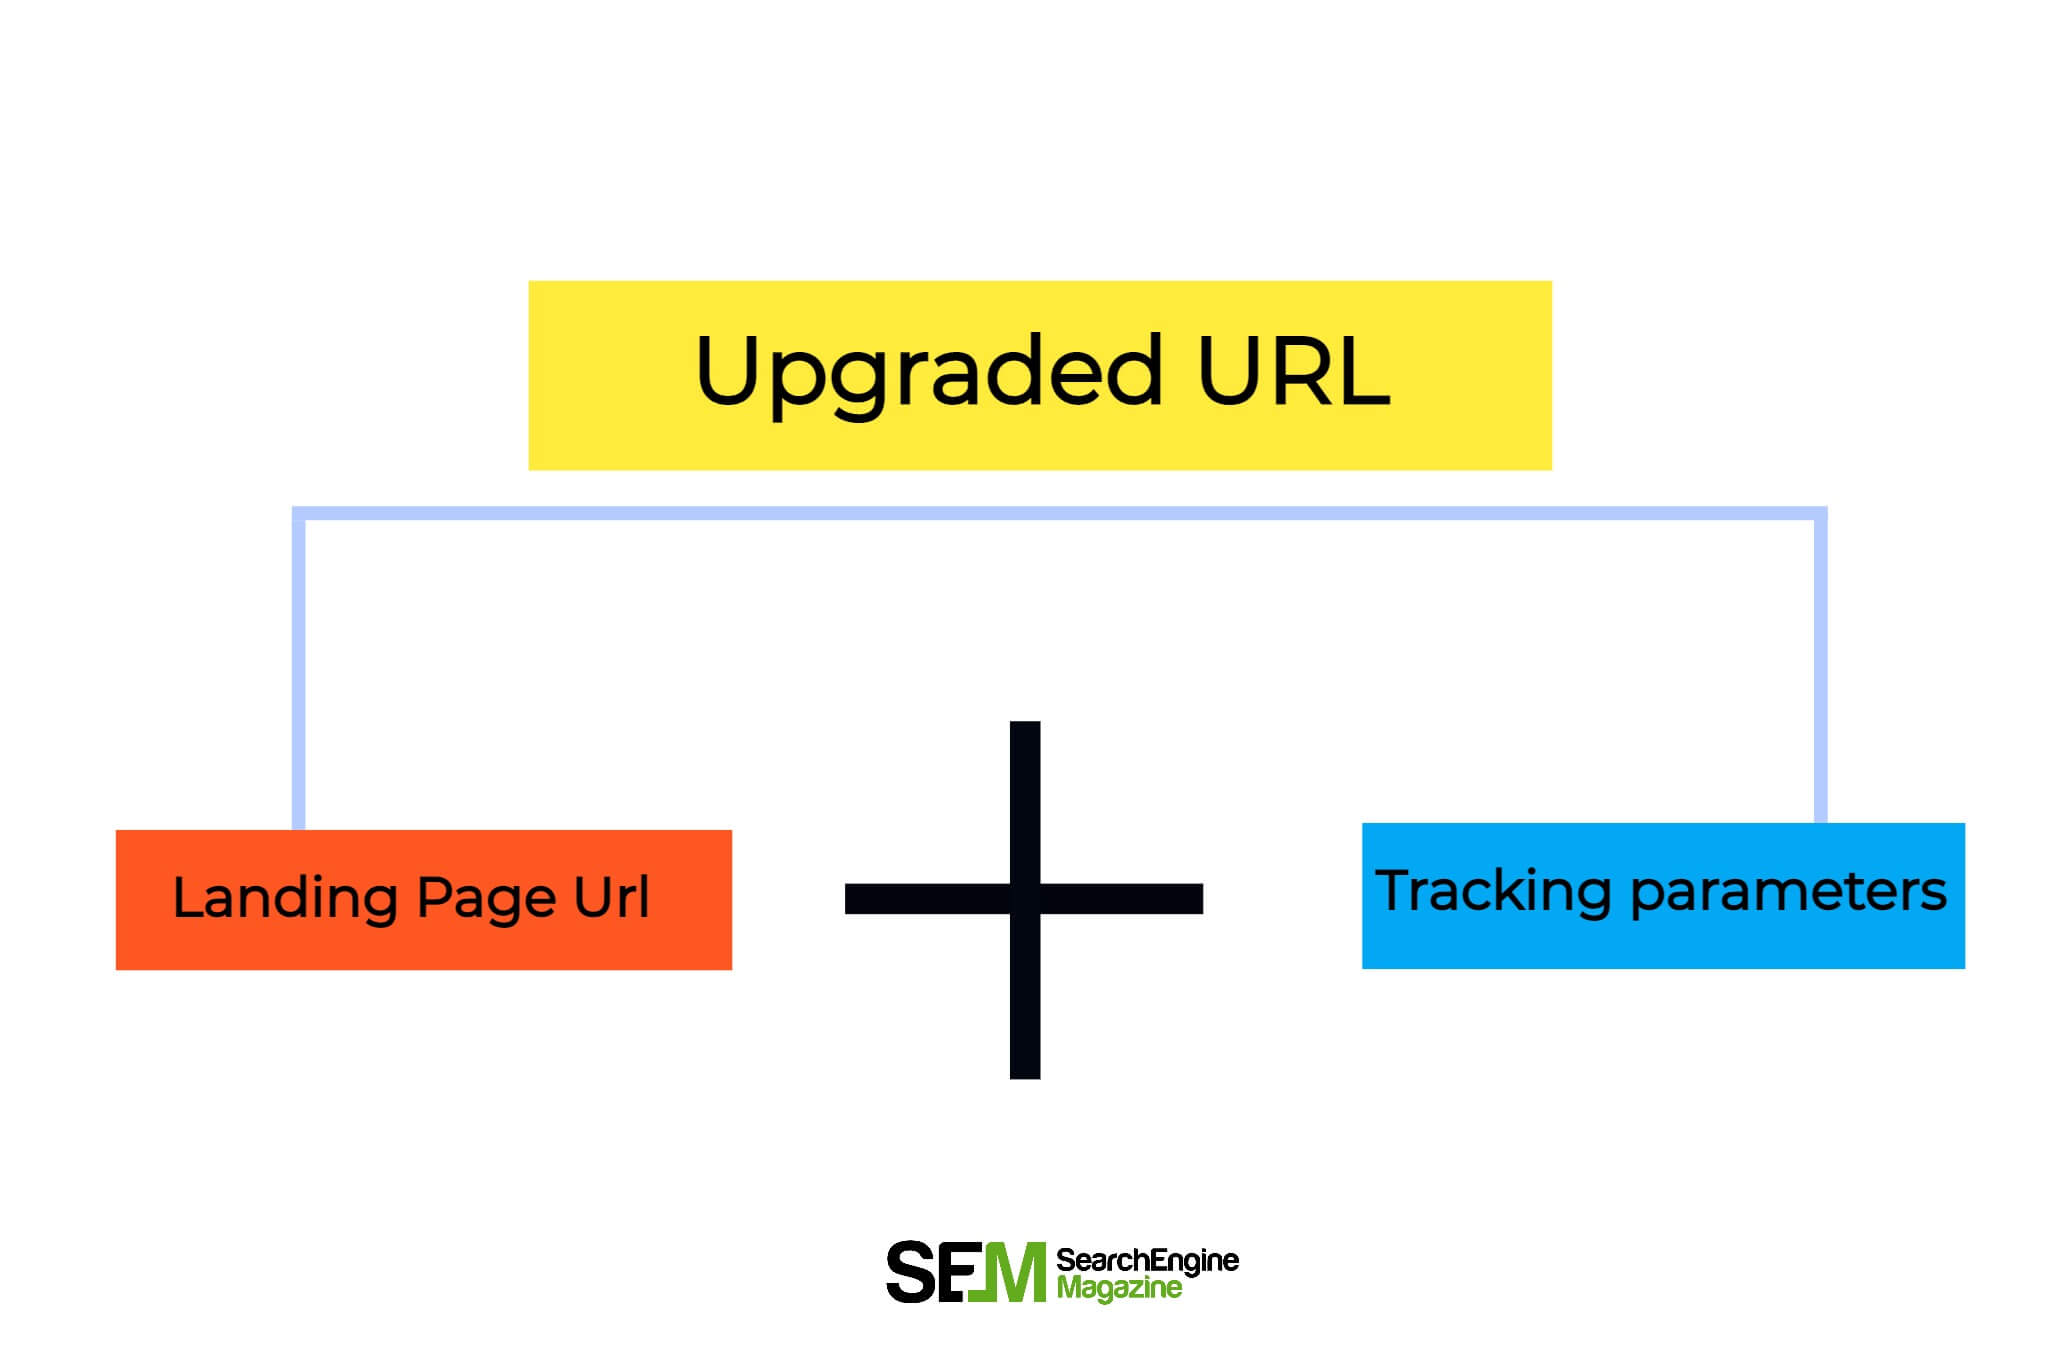 How Do Upgraded Urls Help Advertisers With Third-Party Conversion Tracking?